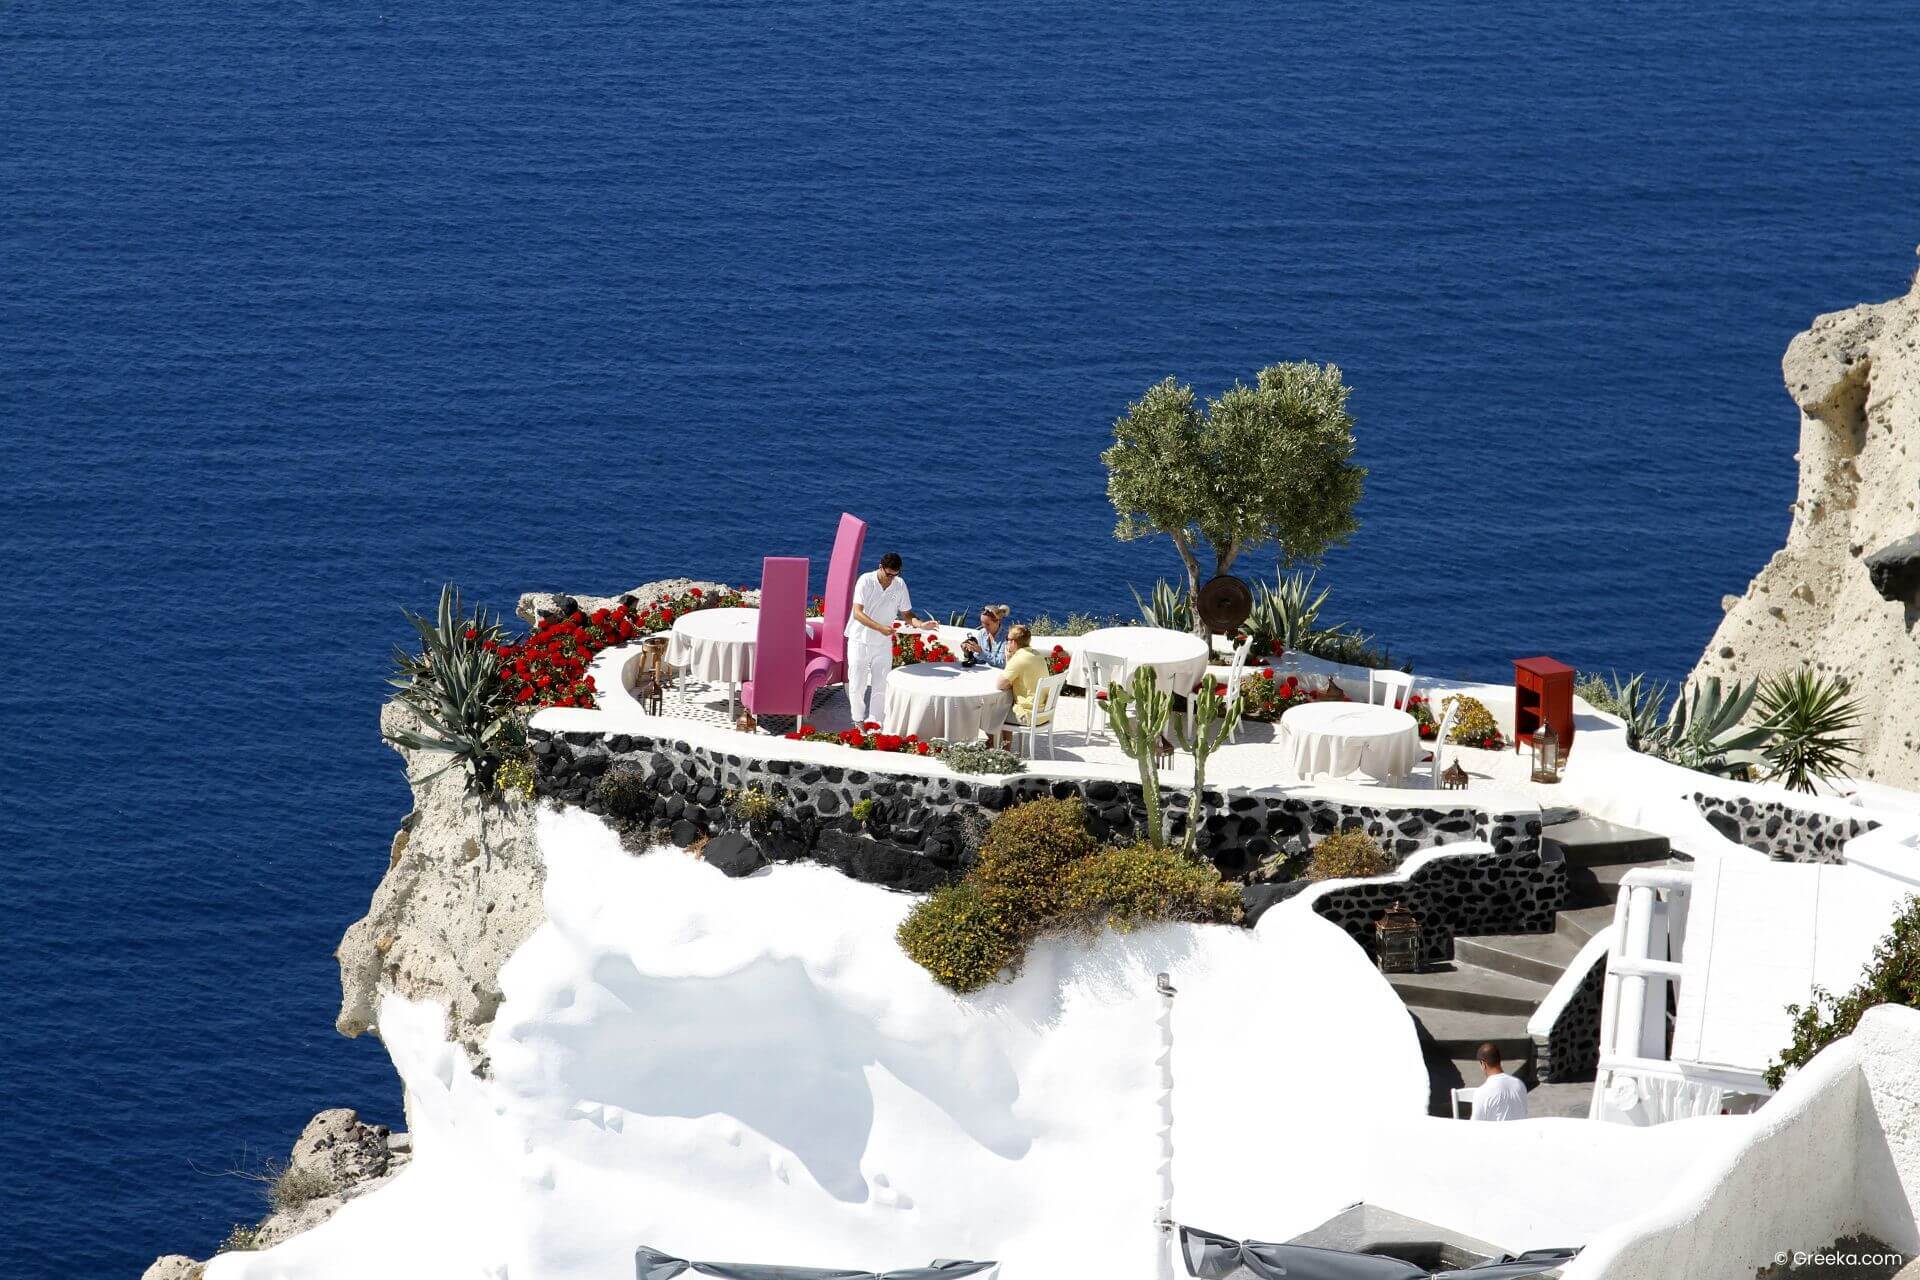 Lunch at Lycabettus restaurant in Santorini, with amazing sea & volcano views